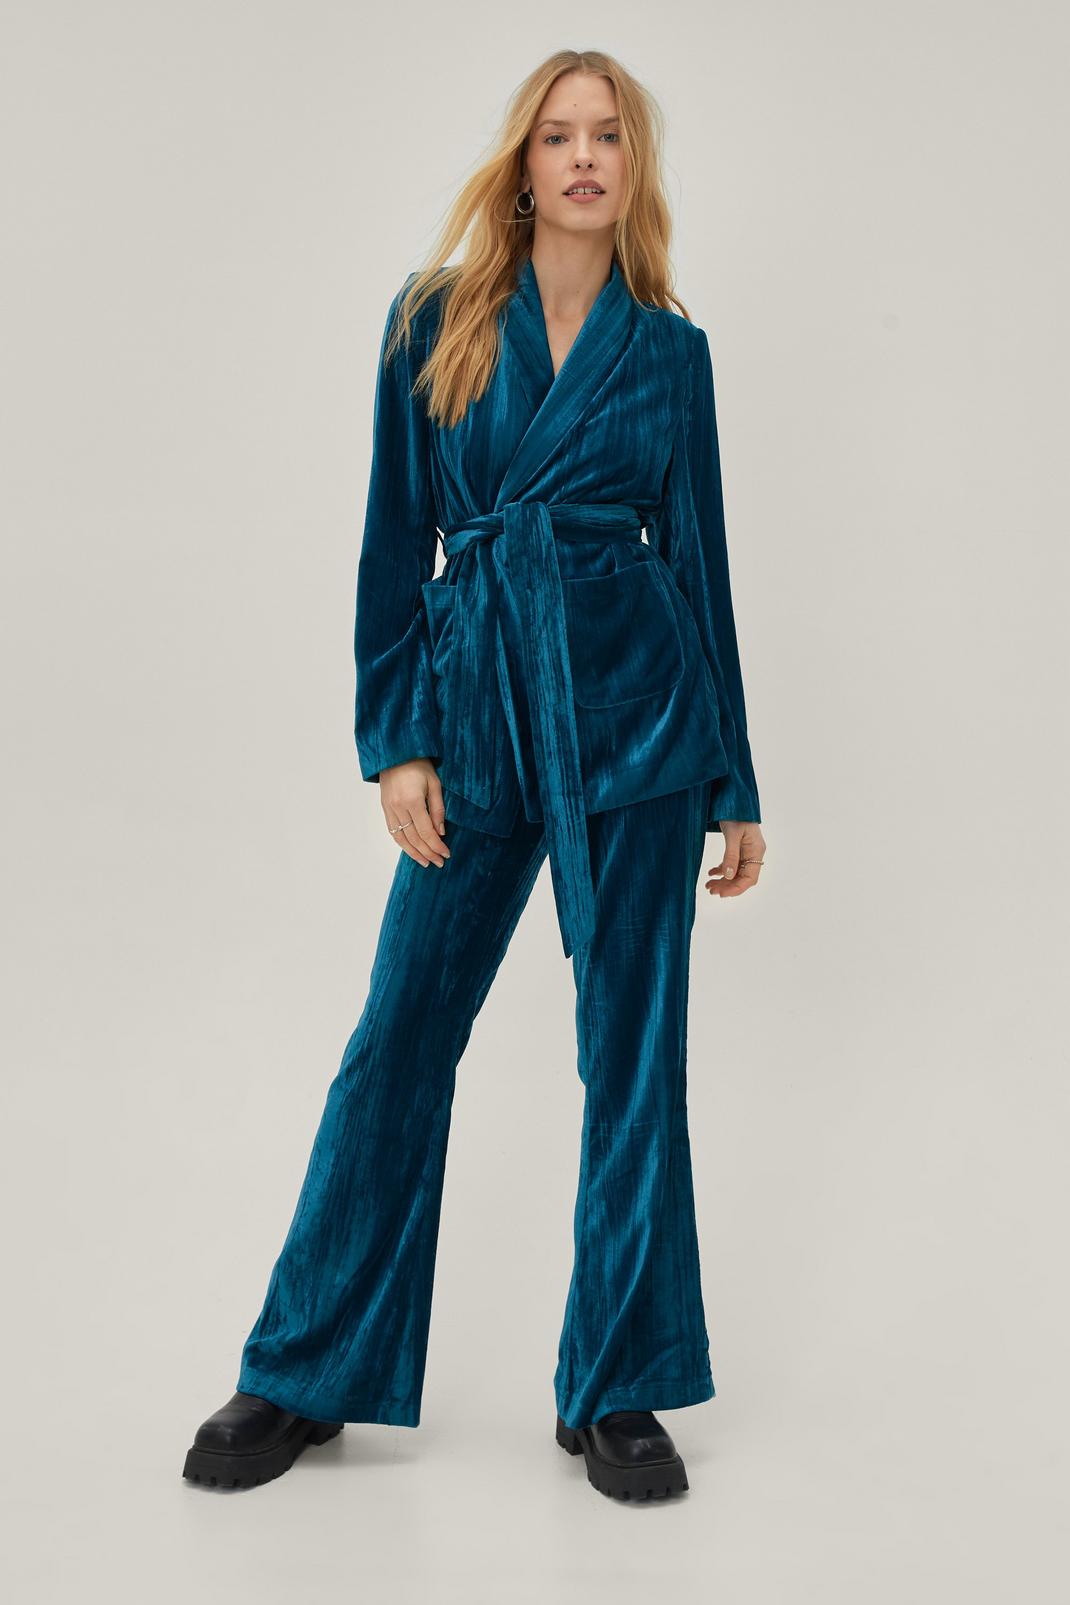 Teal Crushed Velvet High Waisted Flared Trousers image number 1